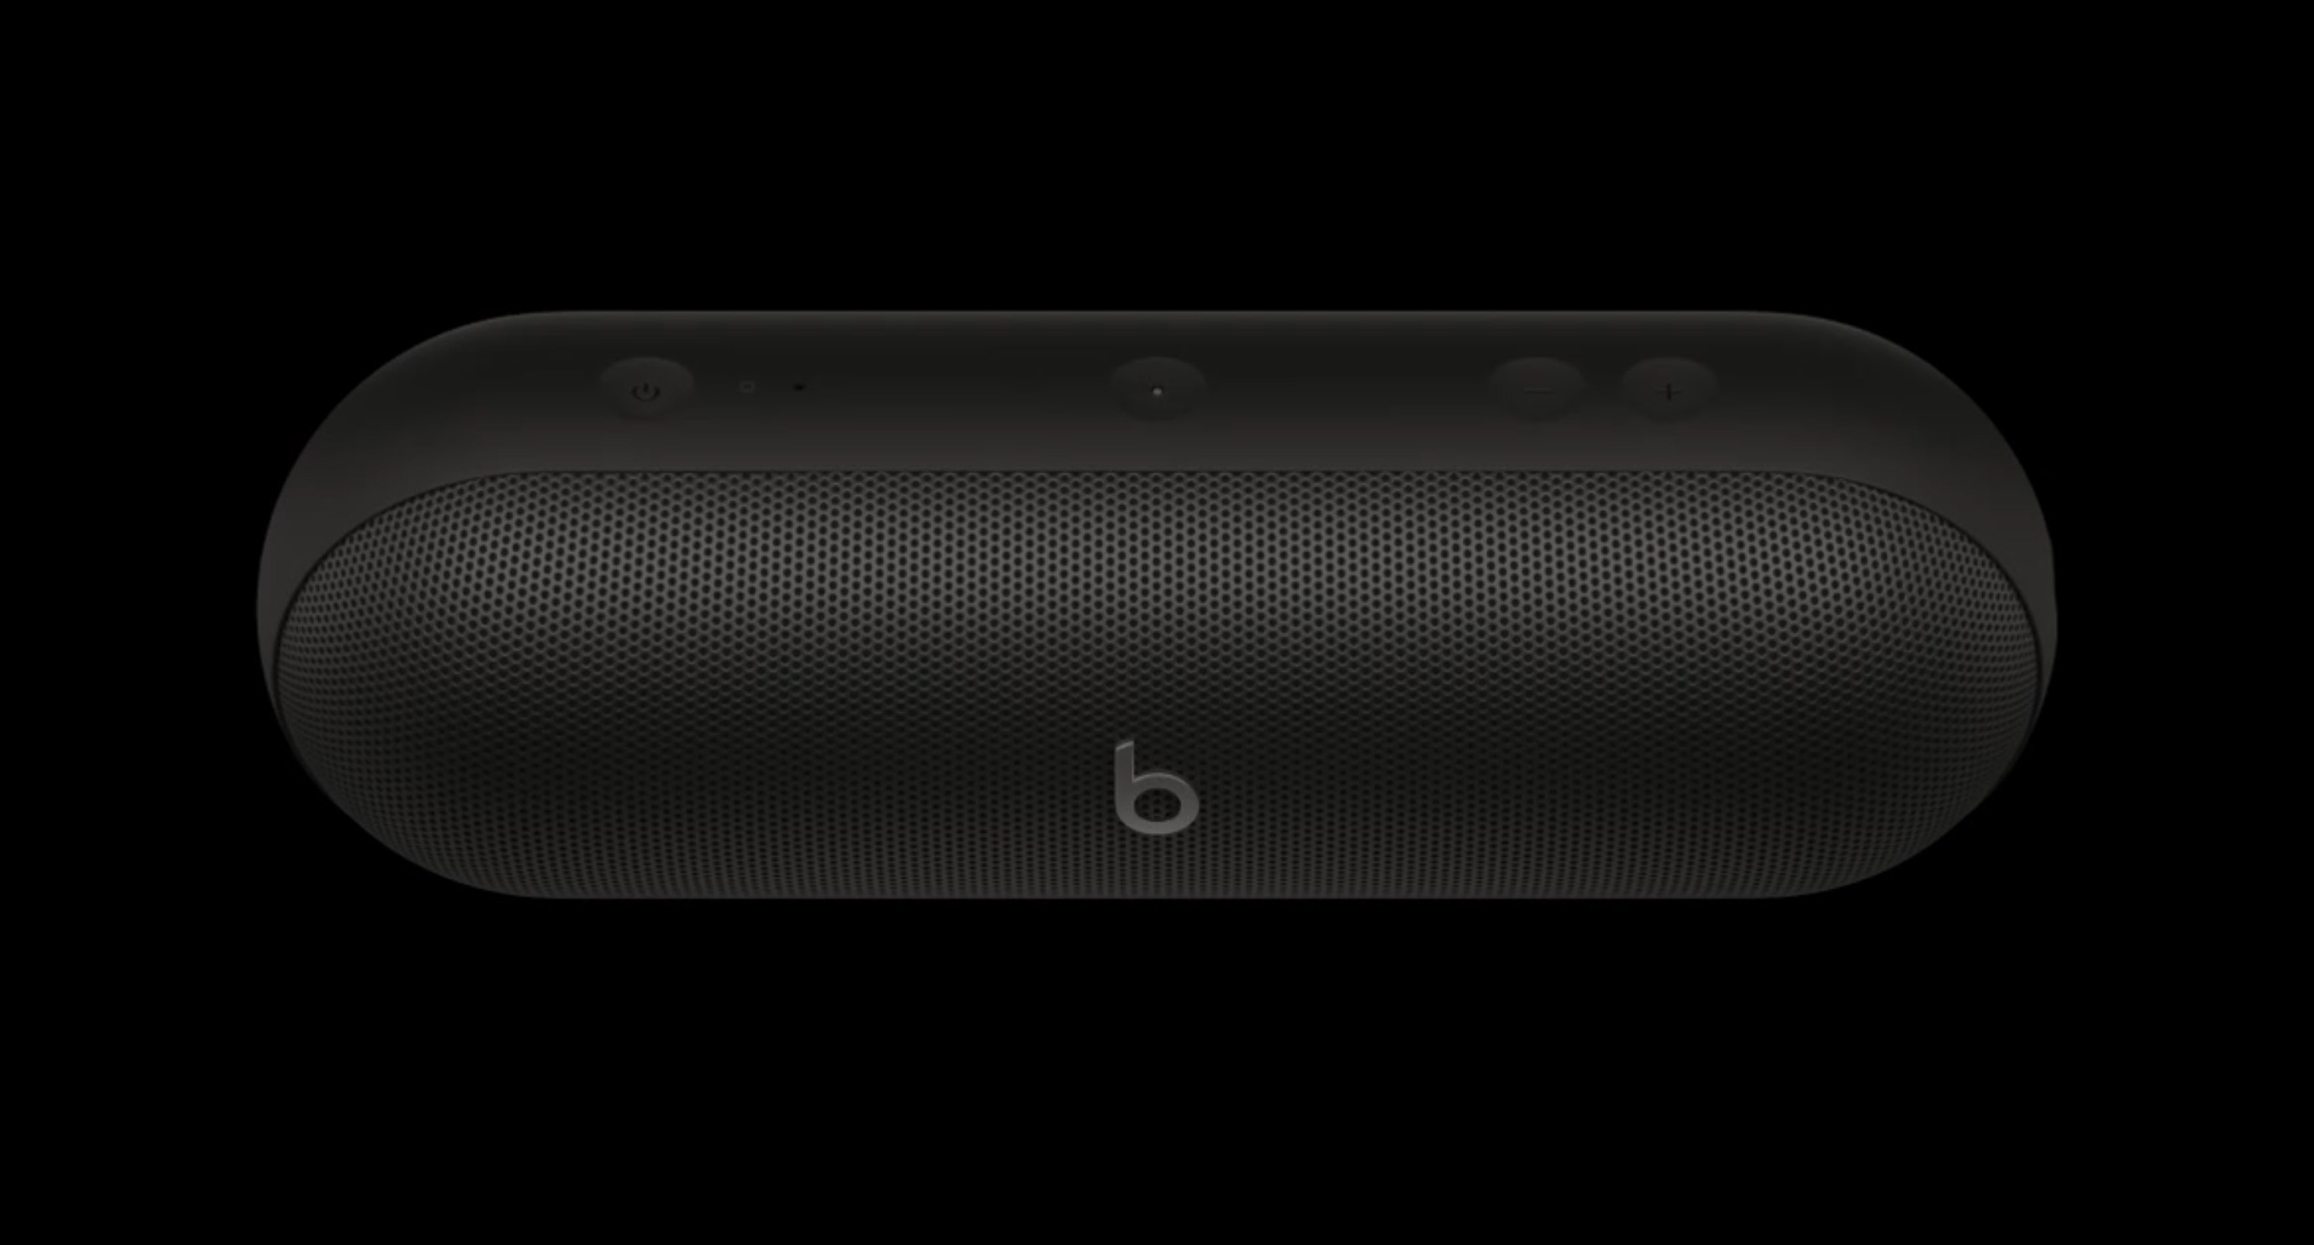 The new Beats Pill wireless speaker is now ready to be announced